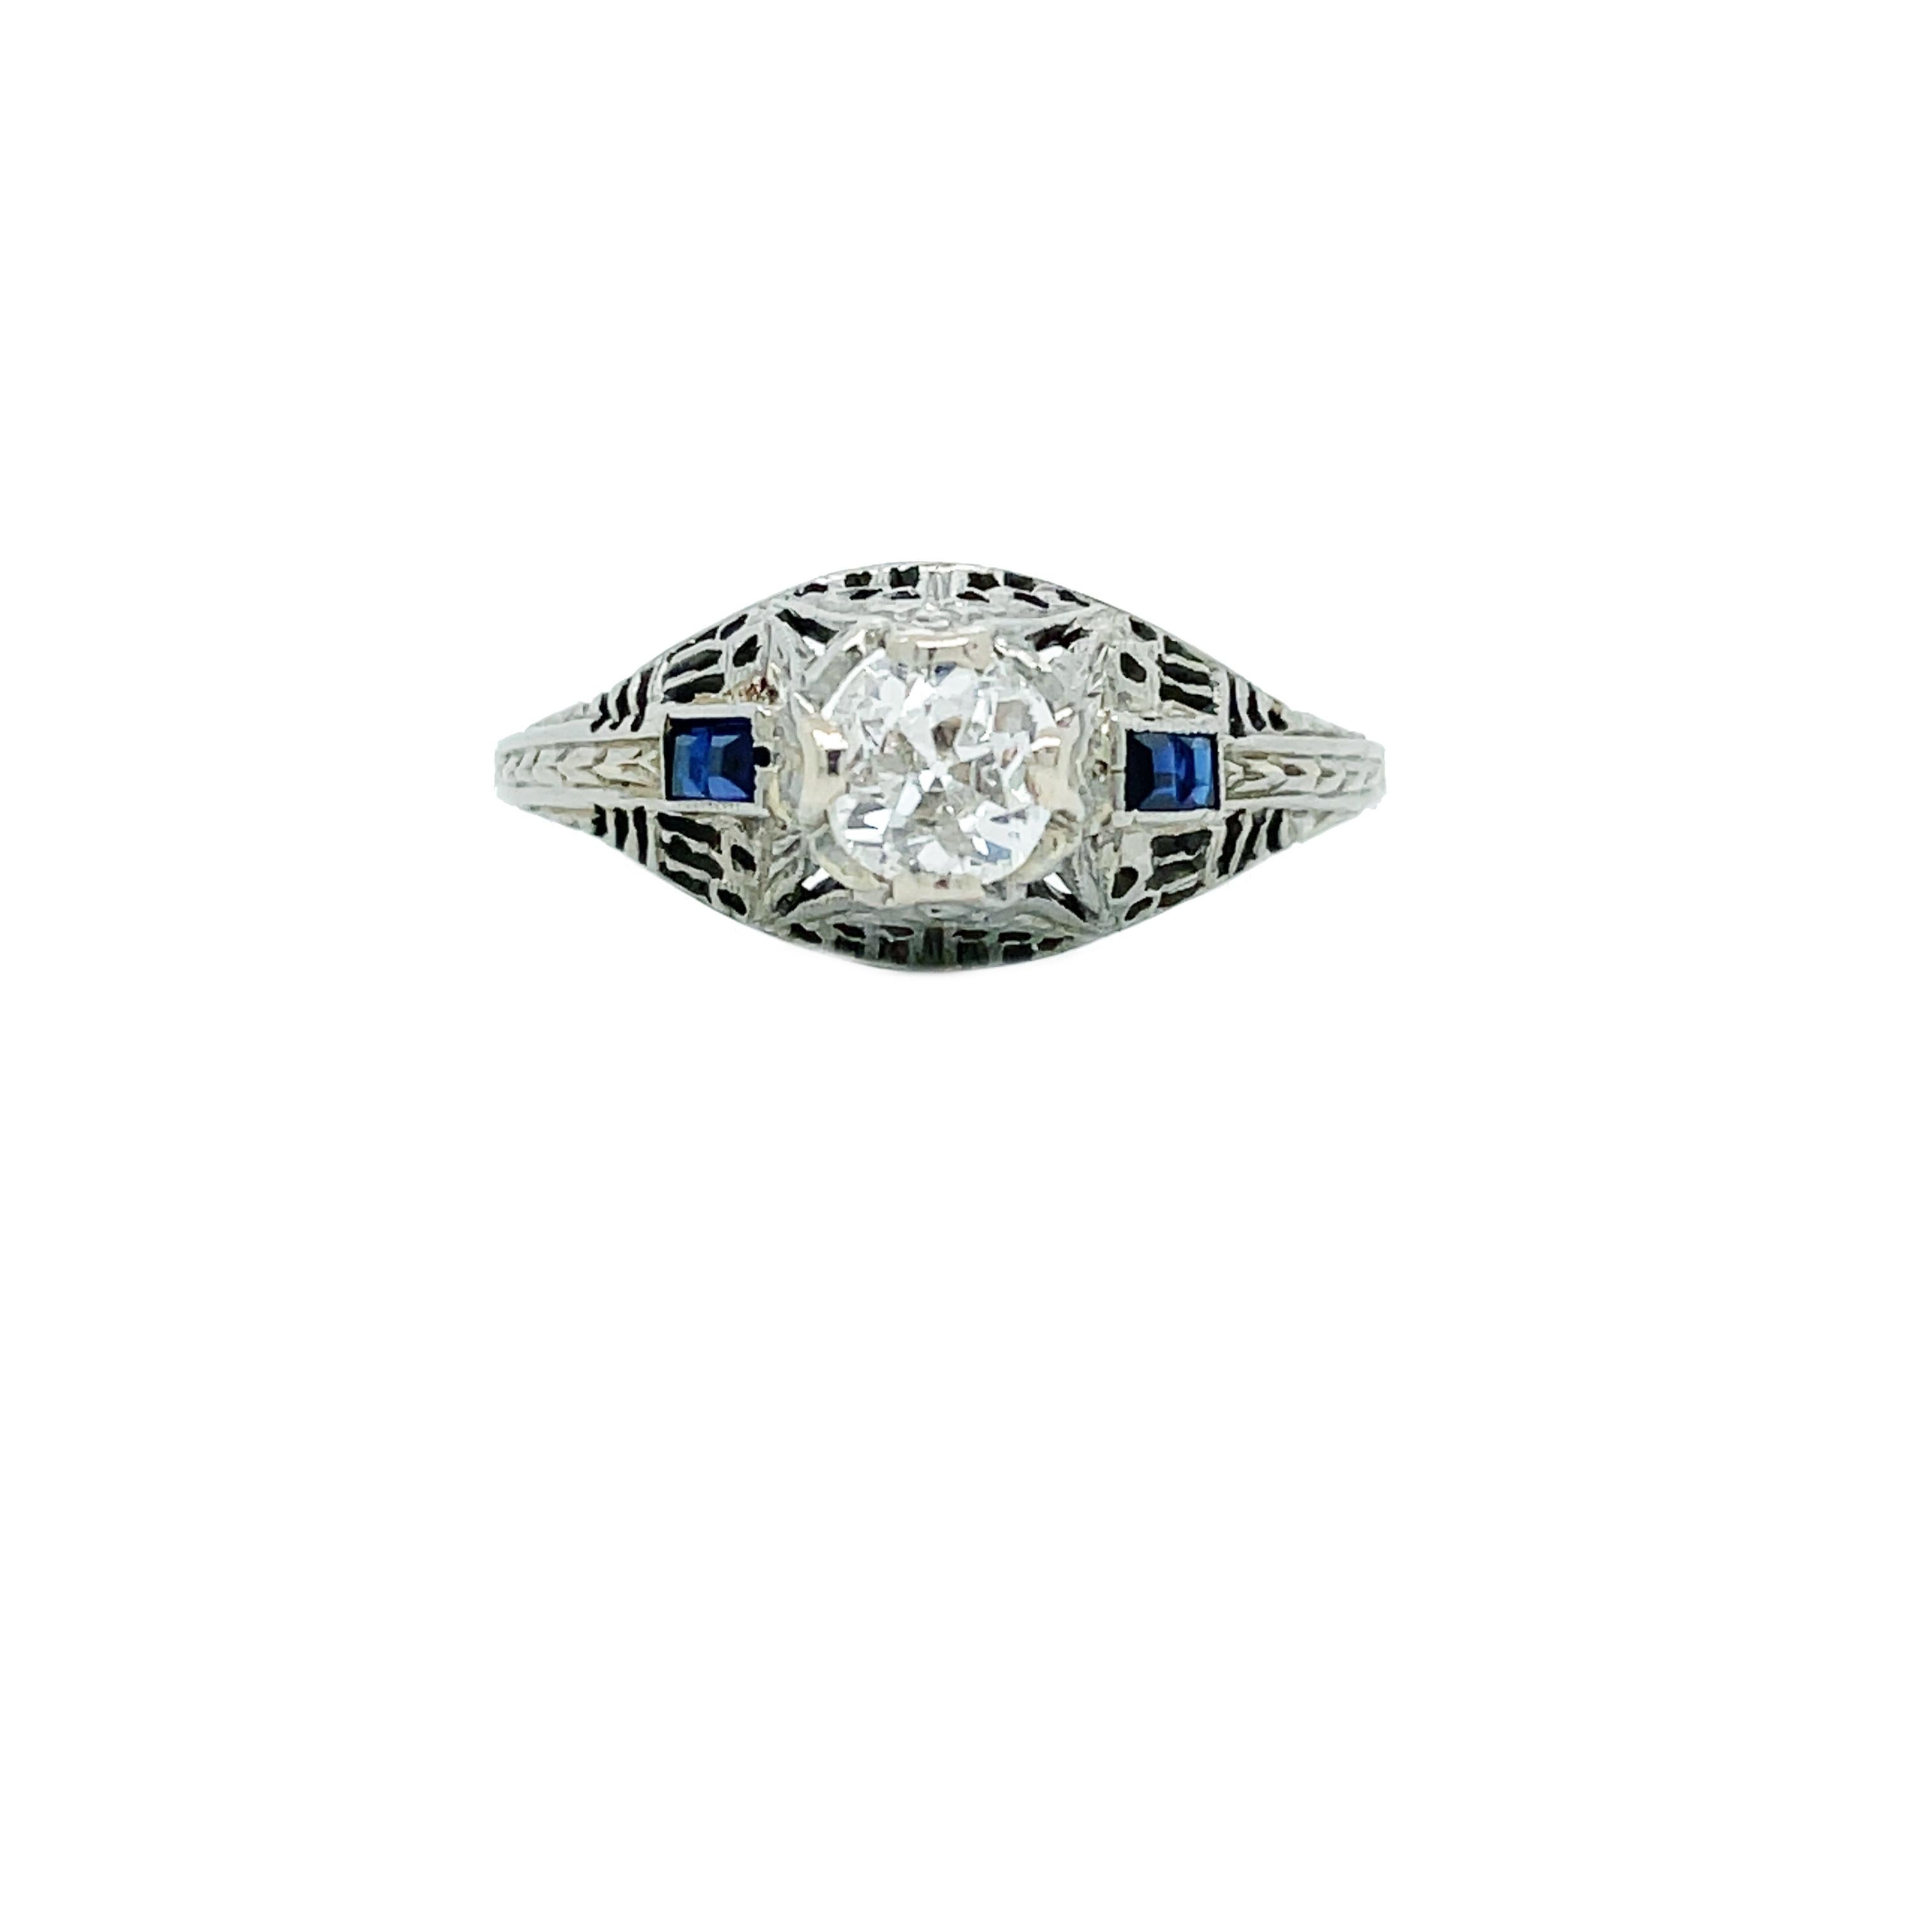 This is a lovely Art Deco 18K white gold ring showcasing a gorgeous icy white old mine cut diamond with vivid blue square synthetic sapphires on the shoulders. This is a stunning example of classic Art Deco jewelry! Set by 4 18K white gold prongs at